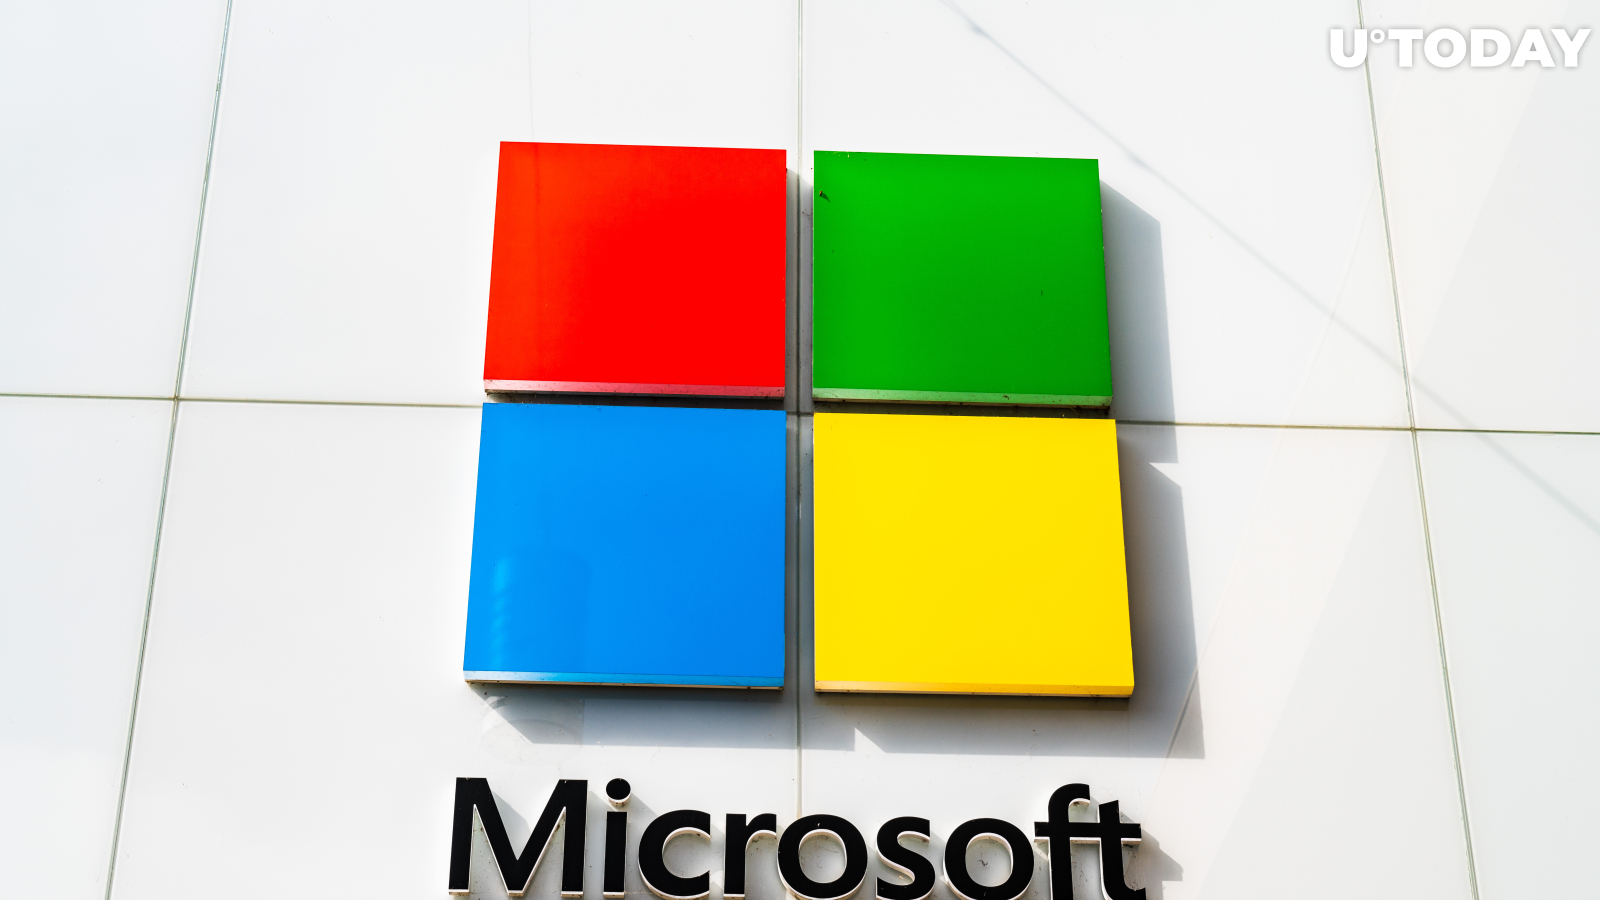 Microsoft President Says No Plans to Put Cash into Bitcoin for Now